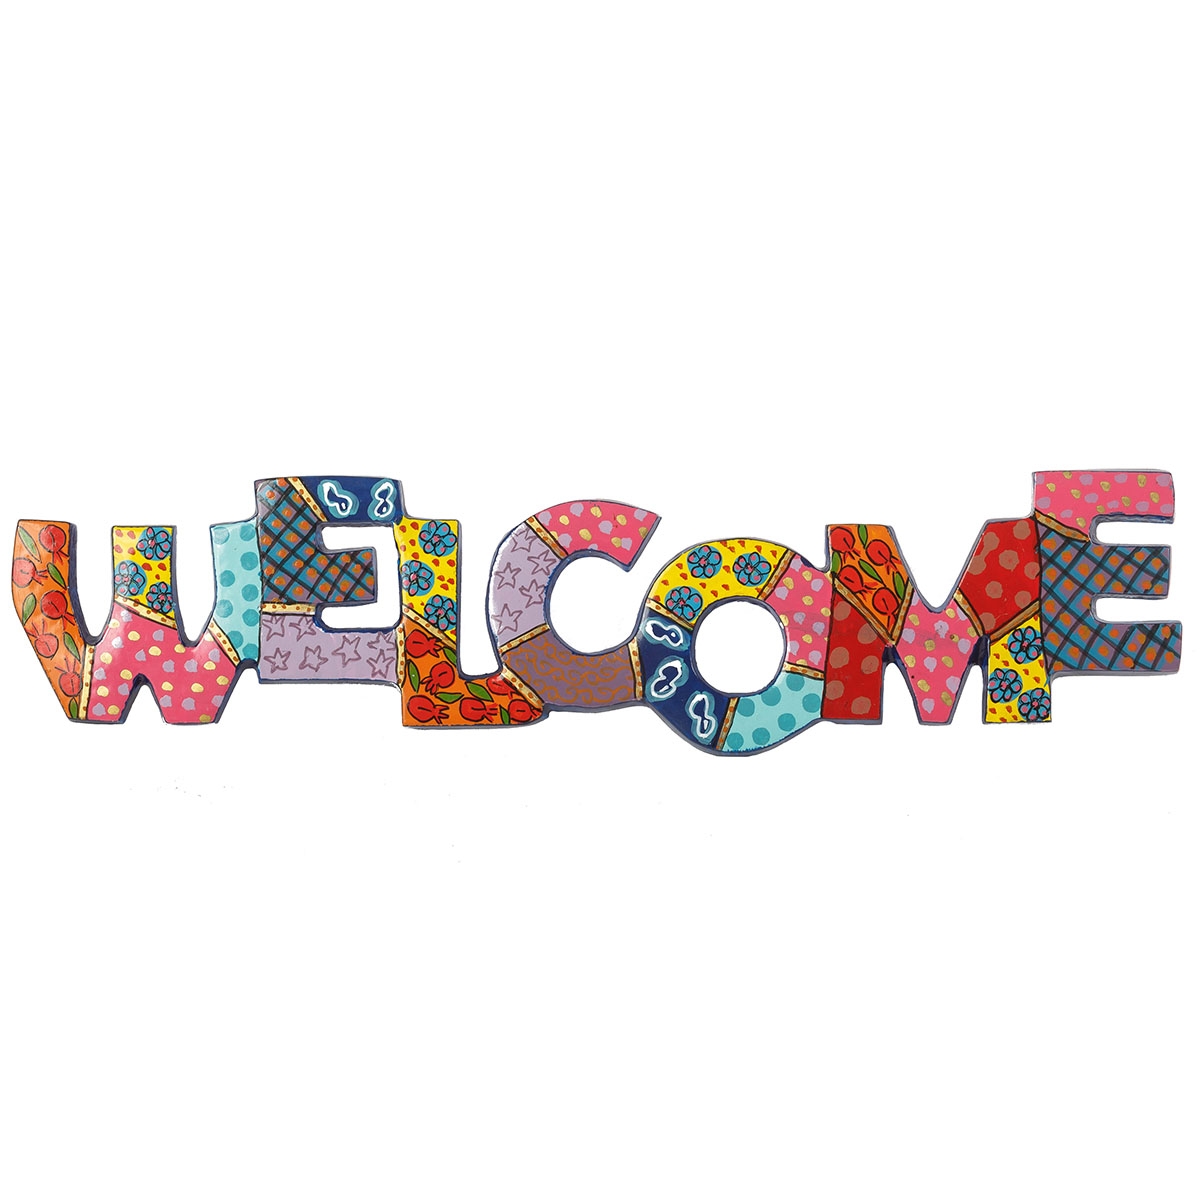 Yair Emanuel Patterned Multicolored Welcome Sign - 1